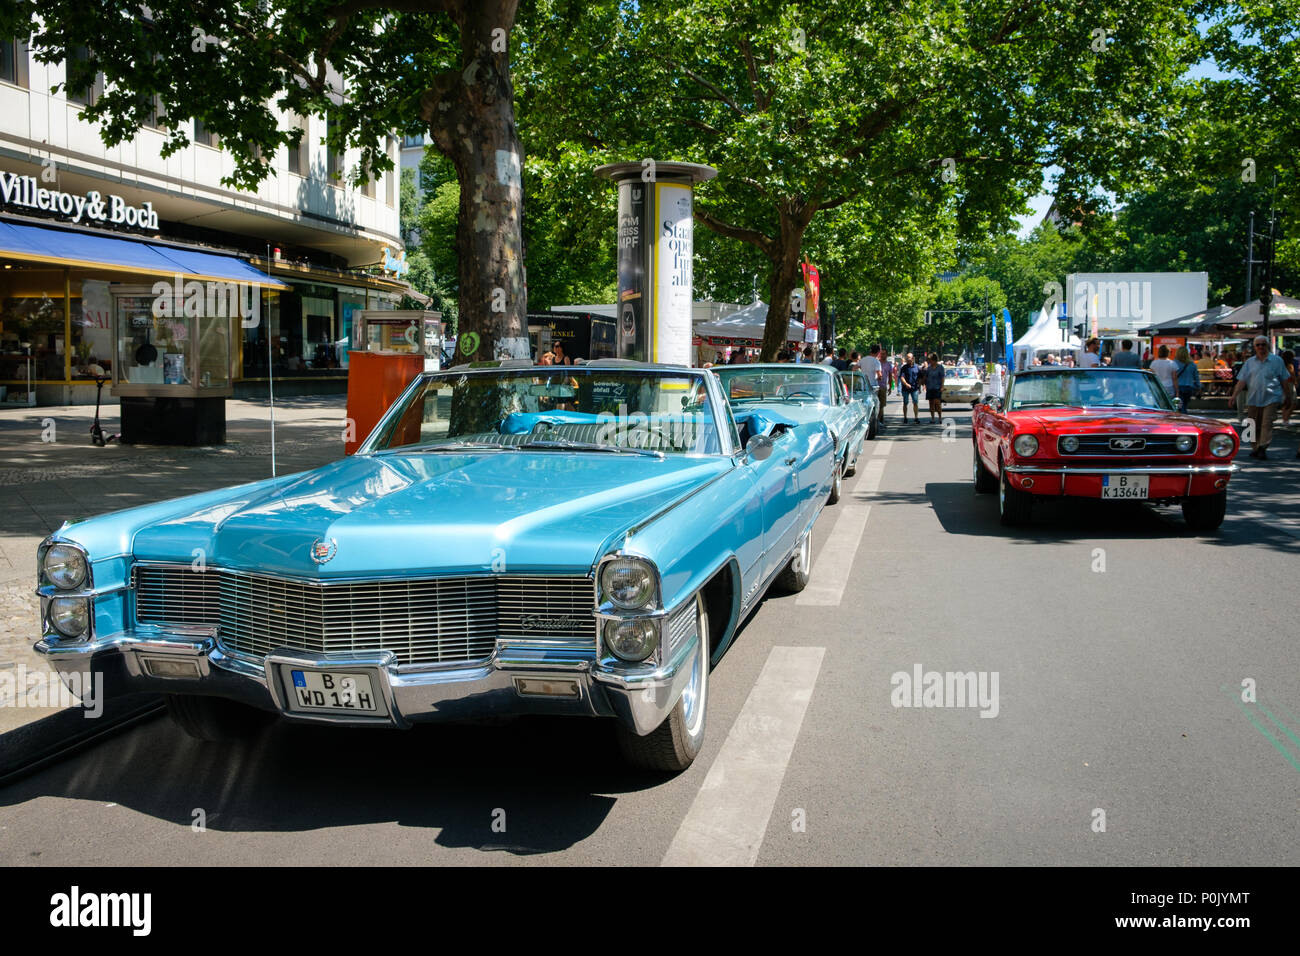 Berlin, Germany - june 09, 2018: Old cars at Berlin Classic Days, a Oldtimer automobile event showing more than 2000 vintage cars at Kurfuerstendamm / Stock Photo